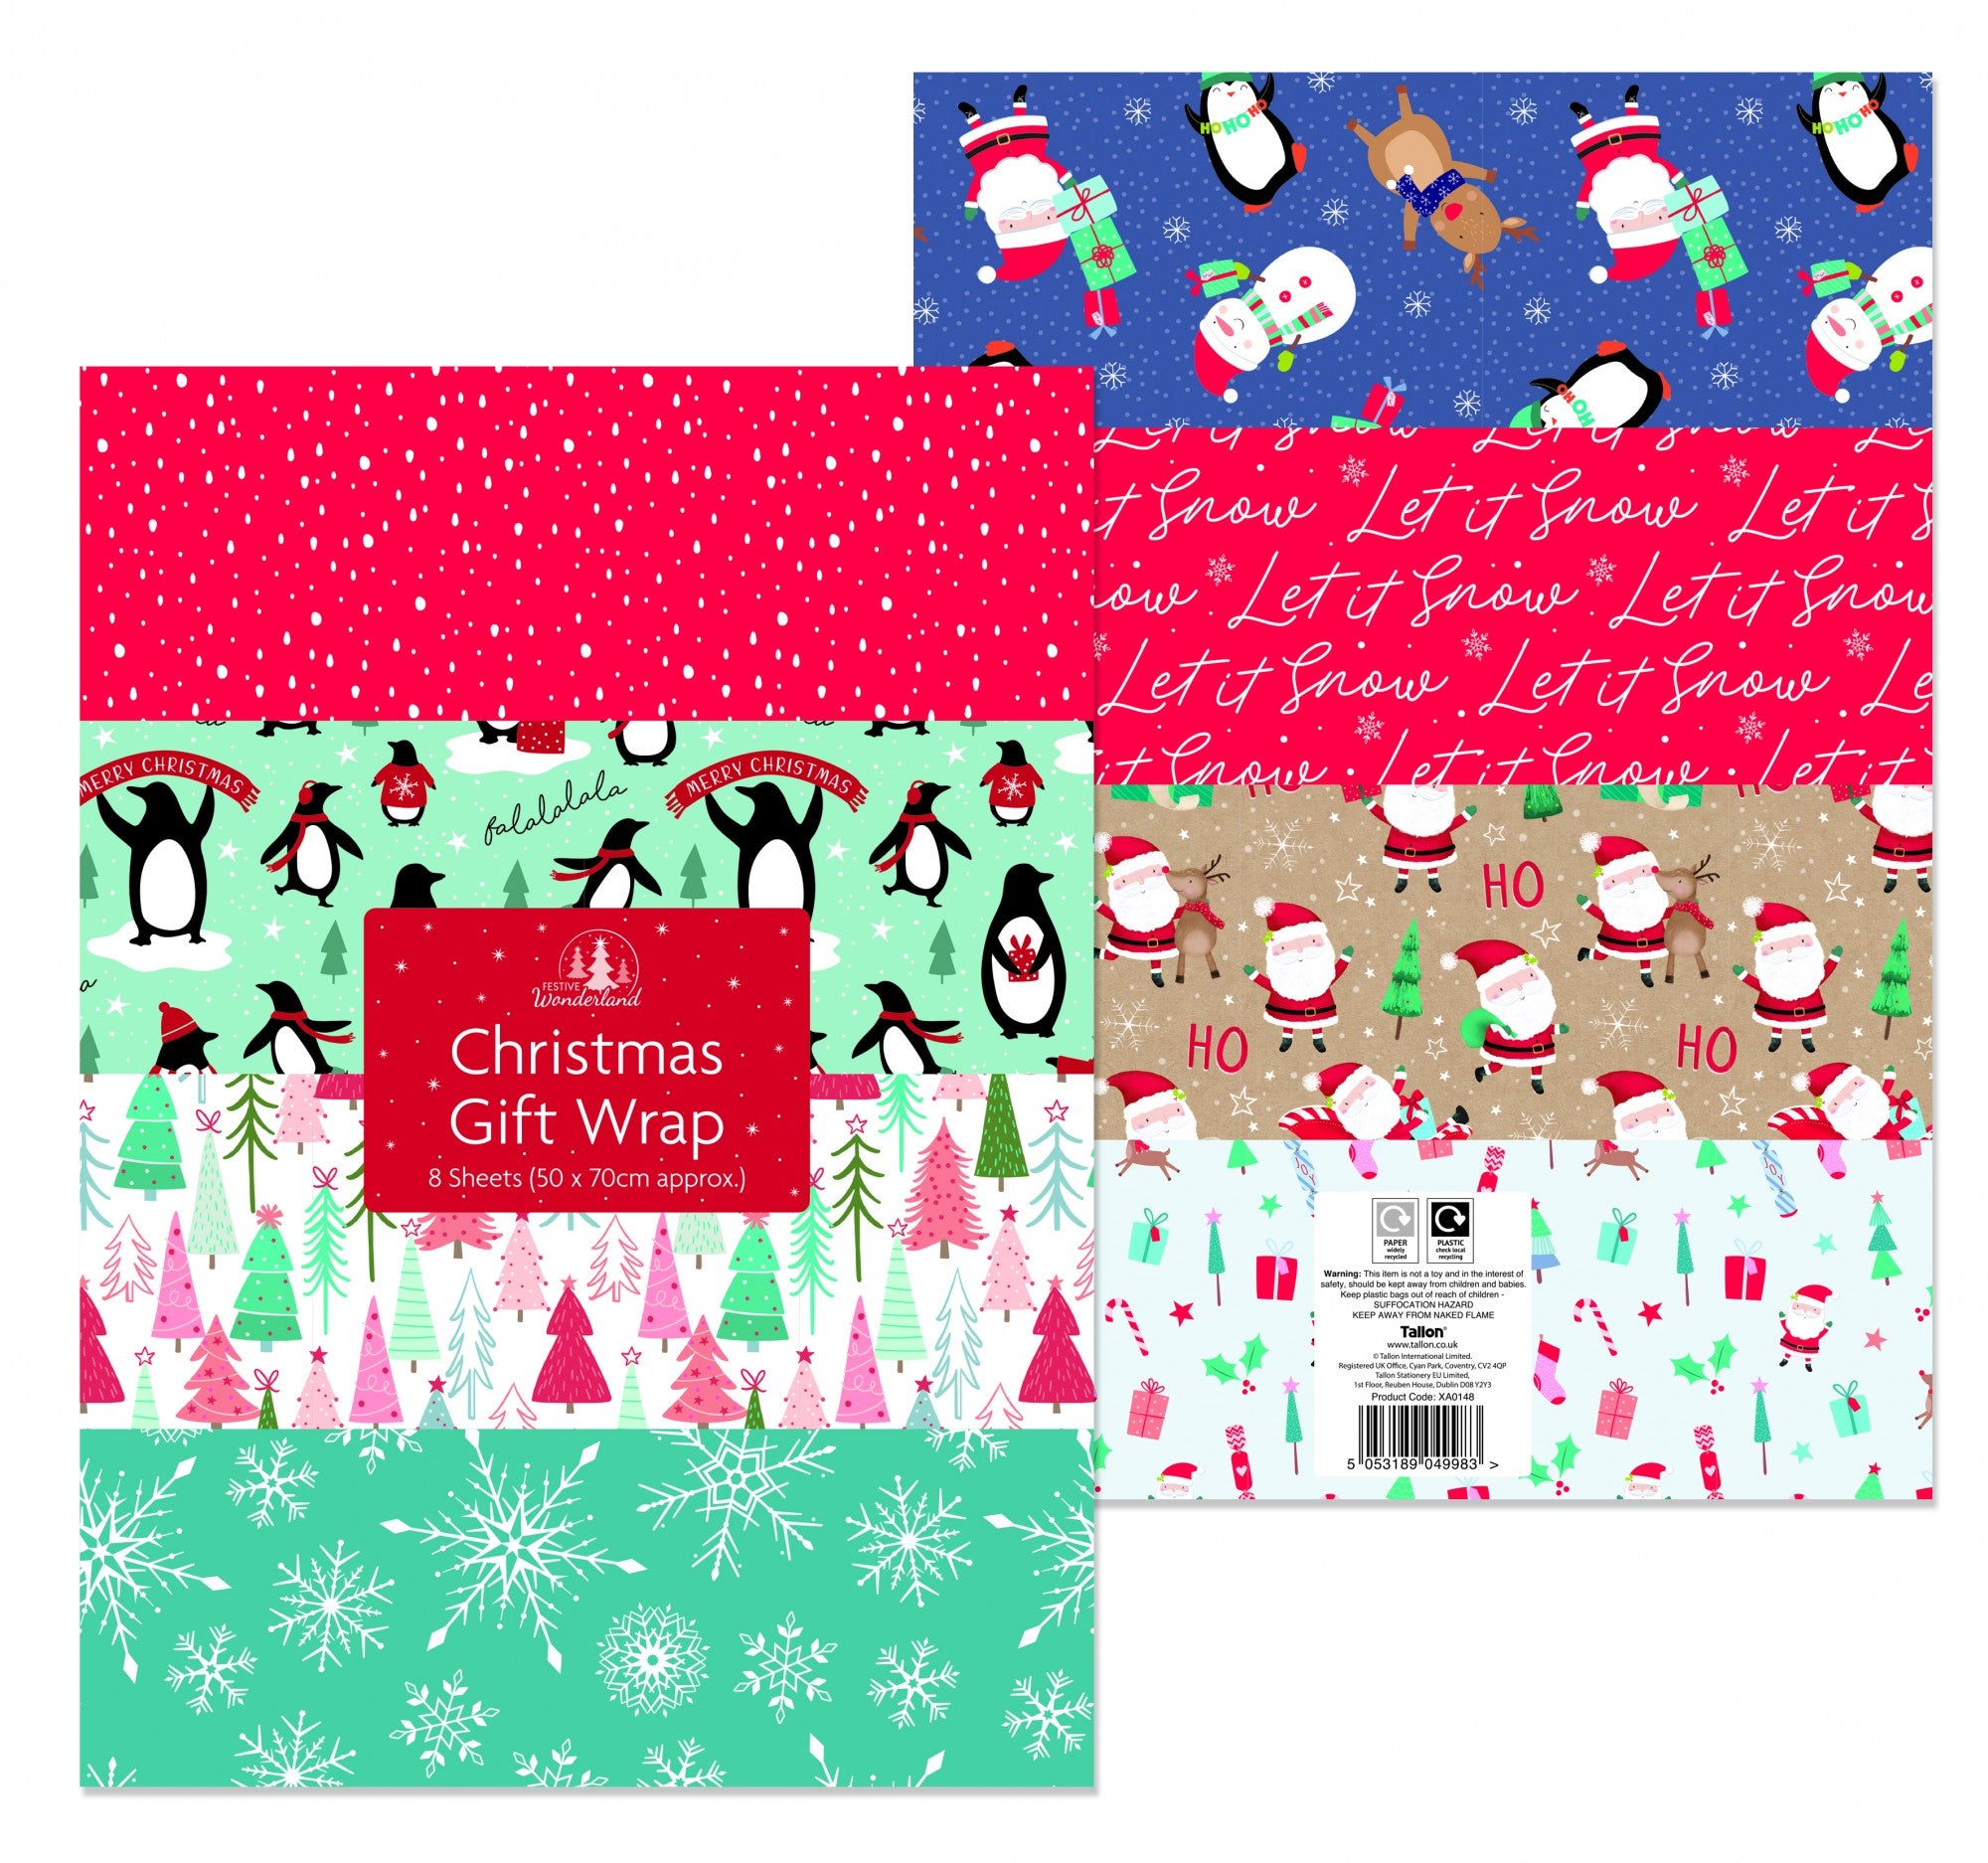 View Christmas Novelty Gift Wrap Sheets information